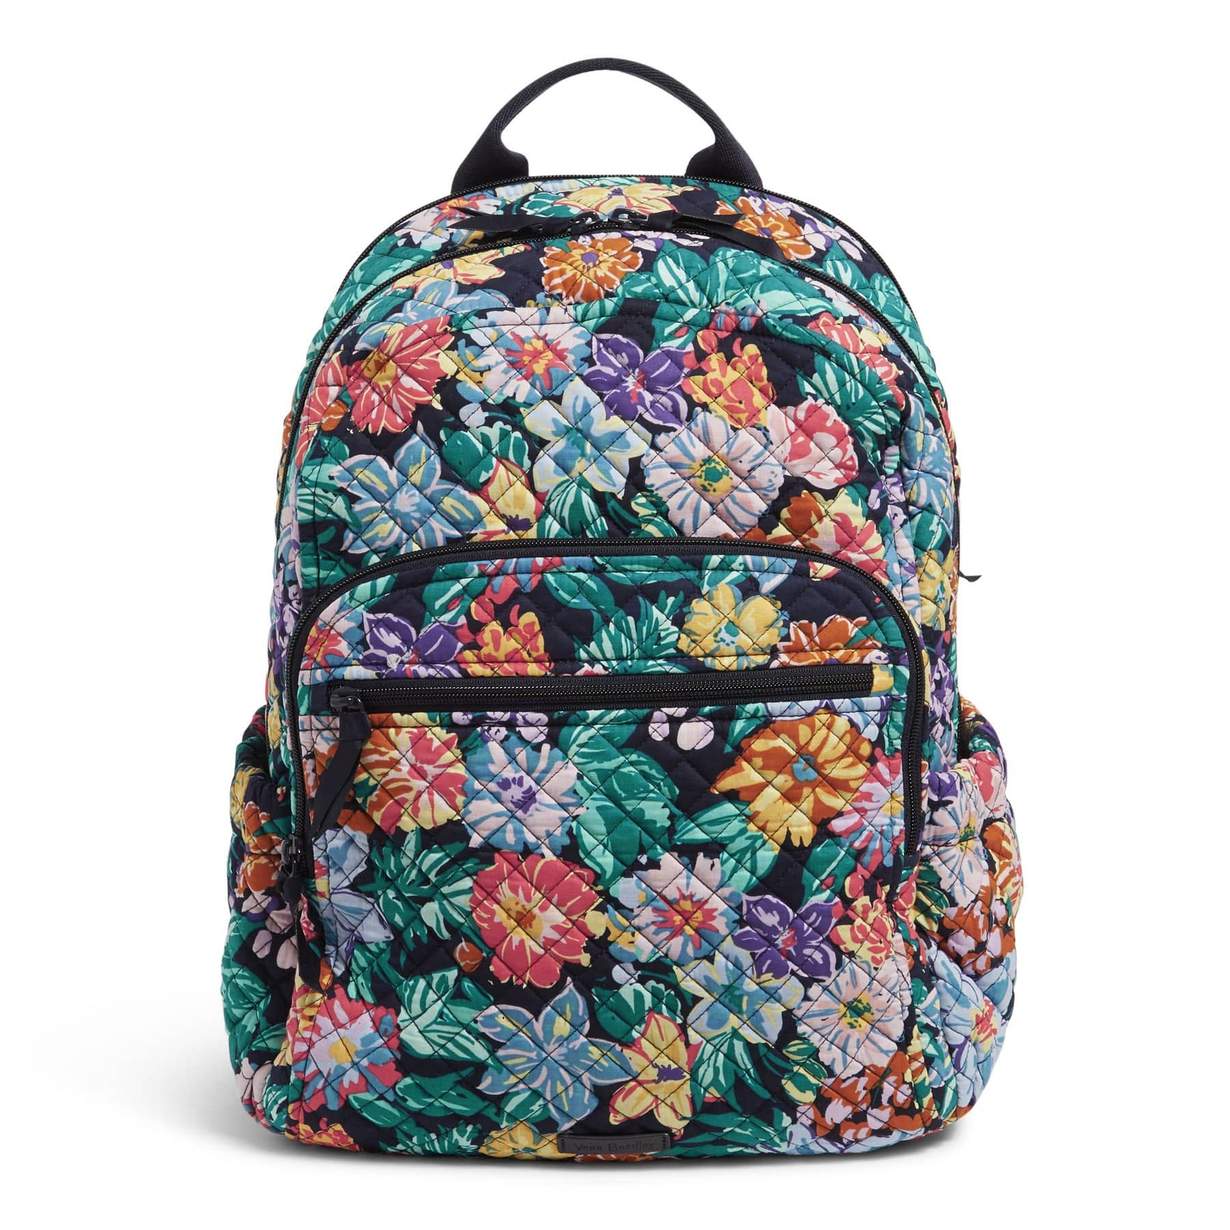 Vera Bradley Campus Backpack - Compare Specs & Features 